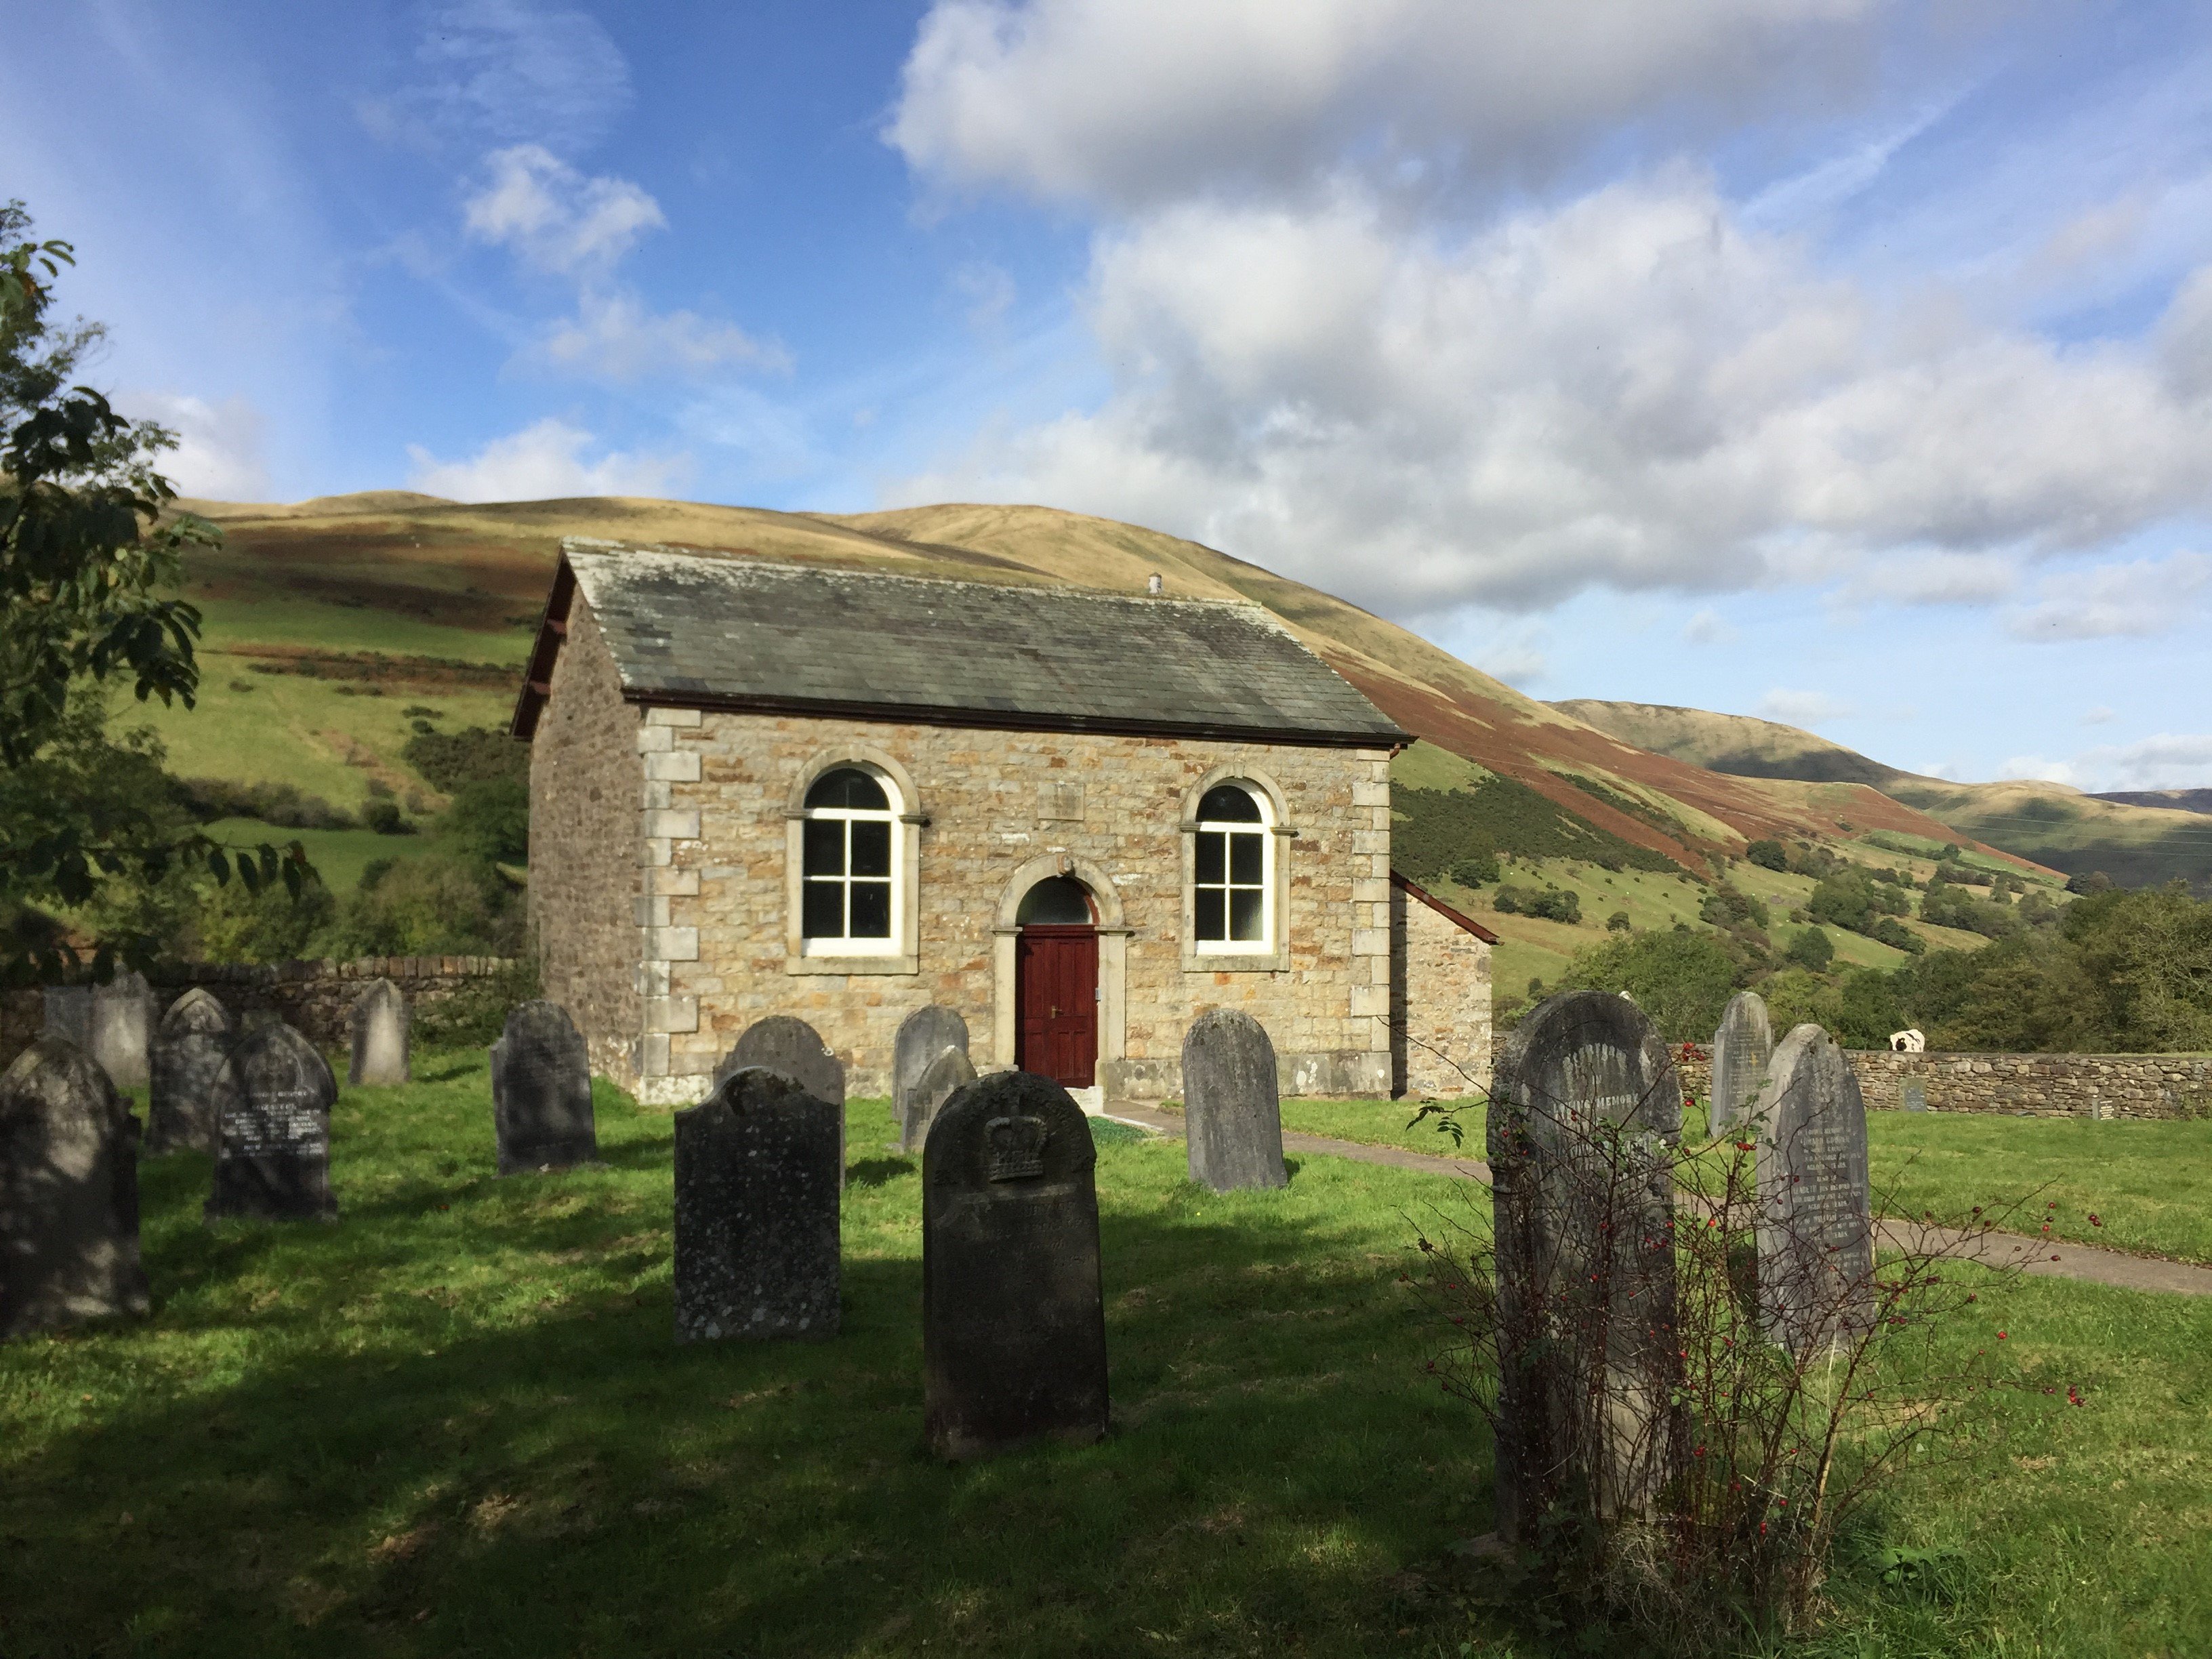 Small stone chapel set in Cumbrian mountain scenery on a sunny day.